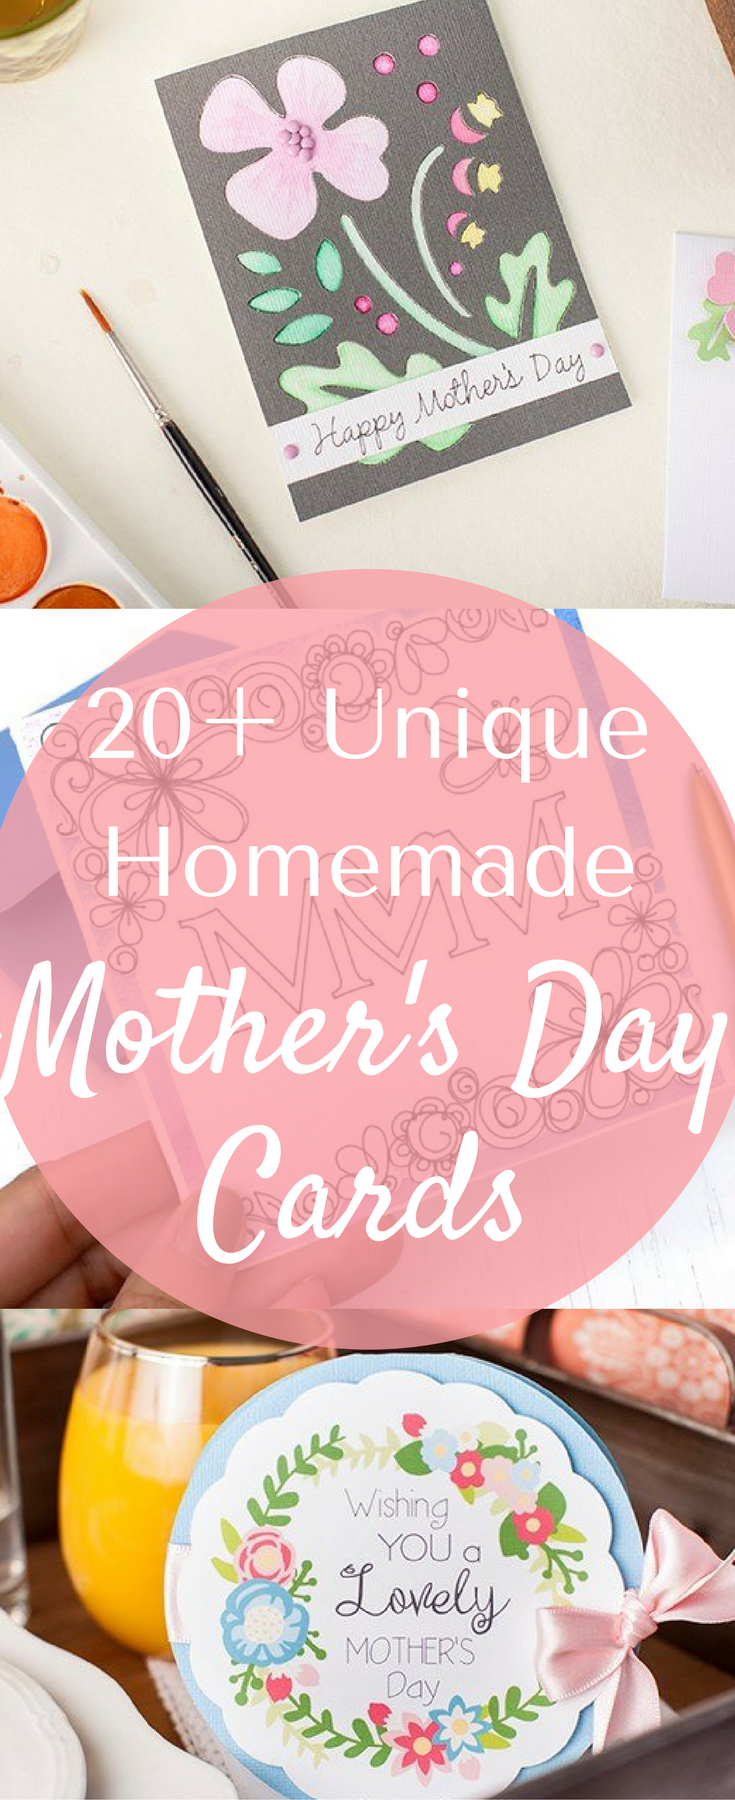 20+ Unique Homemade Mother's Day Cards